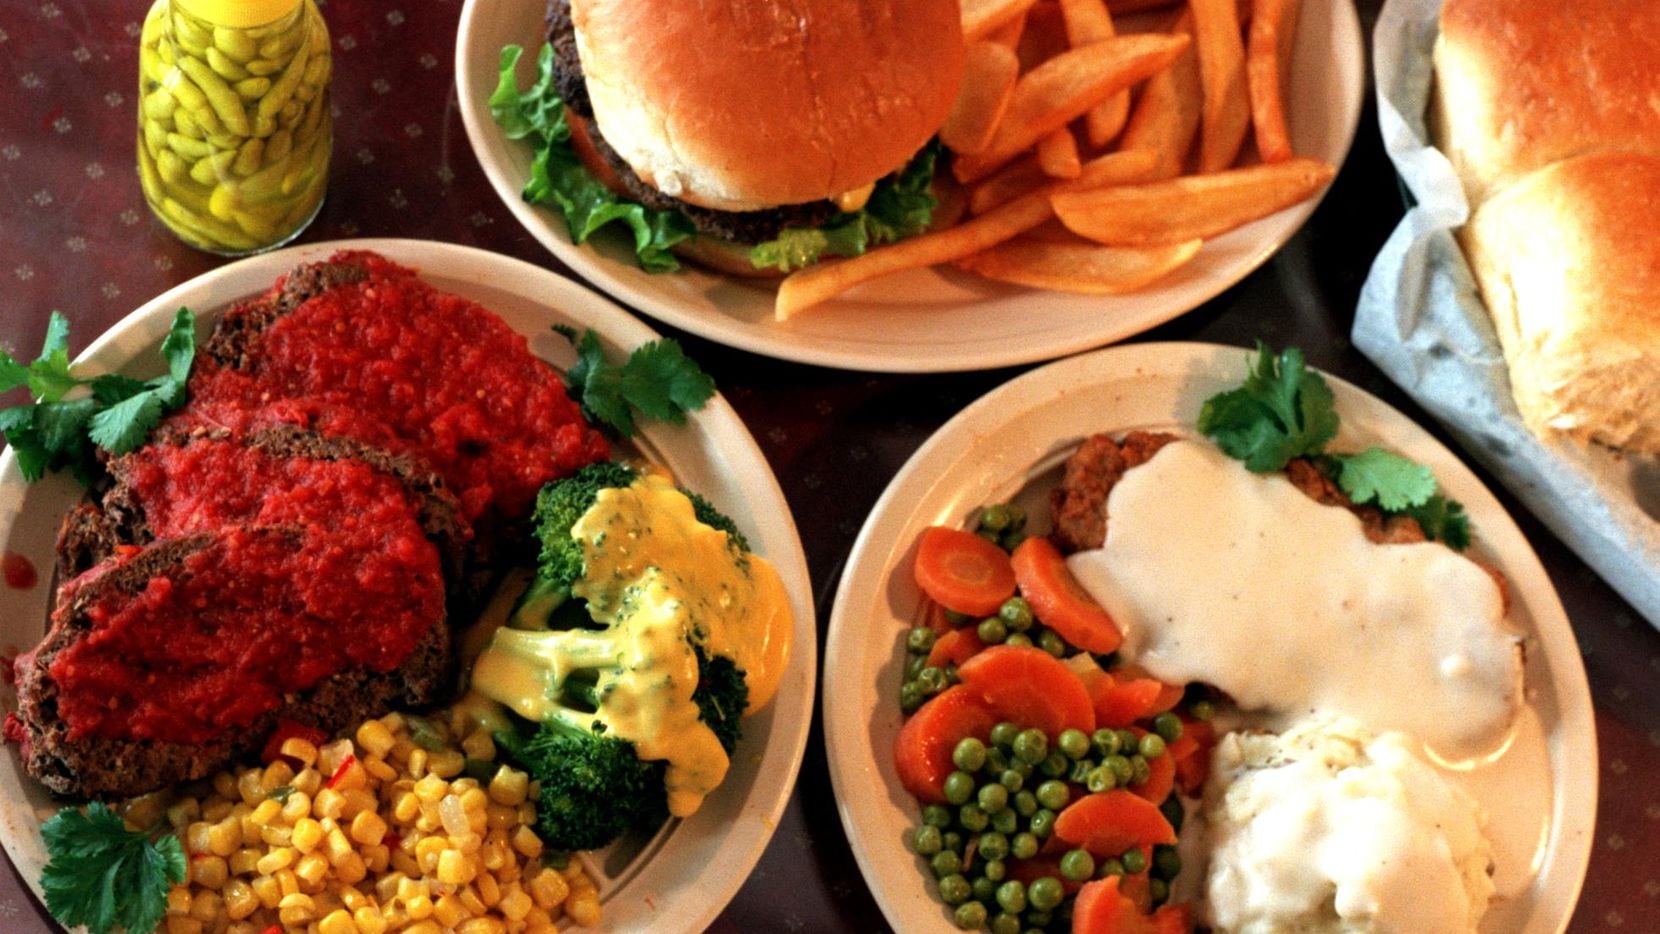 Hubbard's Cubbard was known for its family-sized helpings of burgers, meatloaf and...